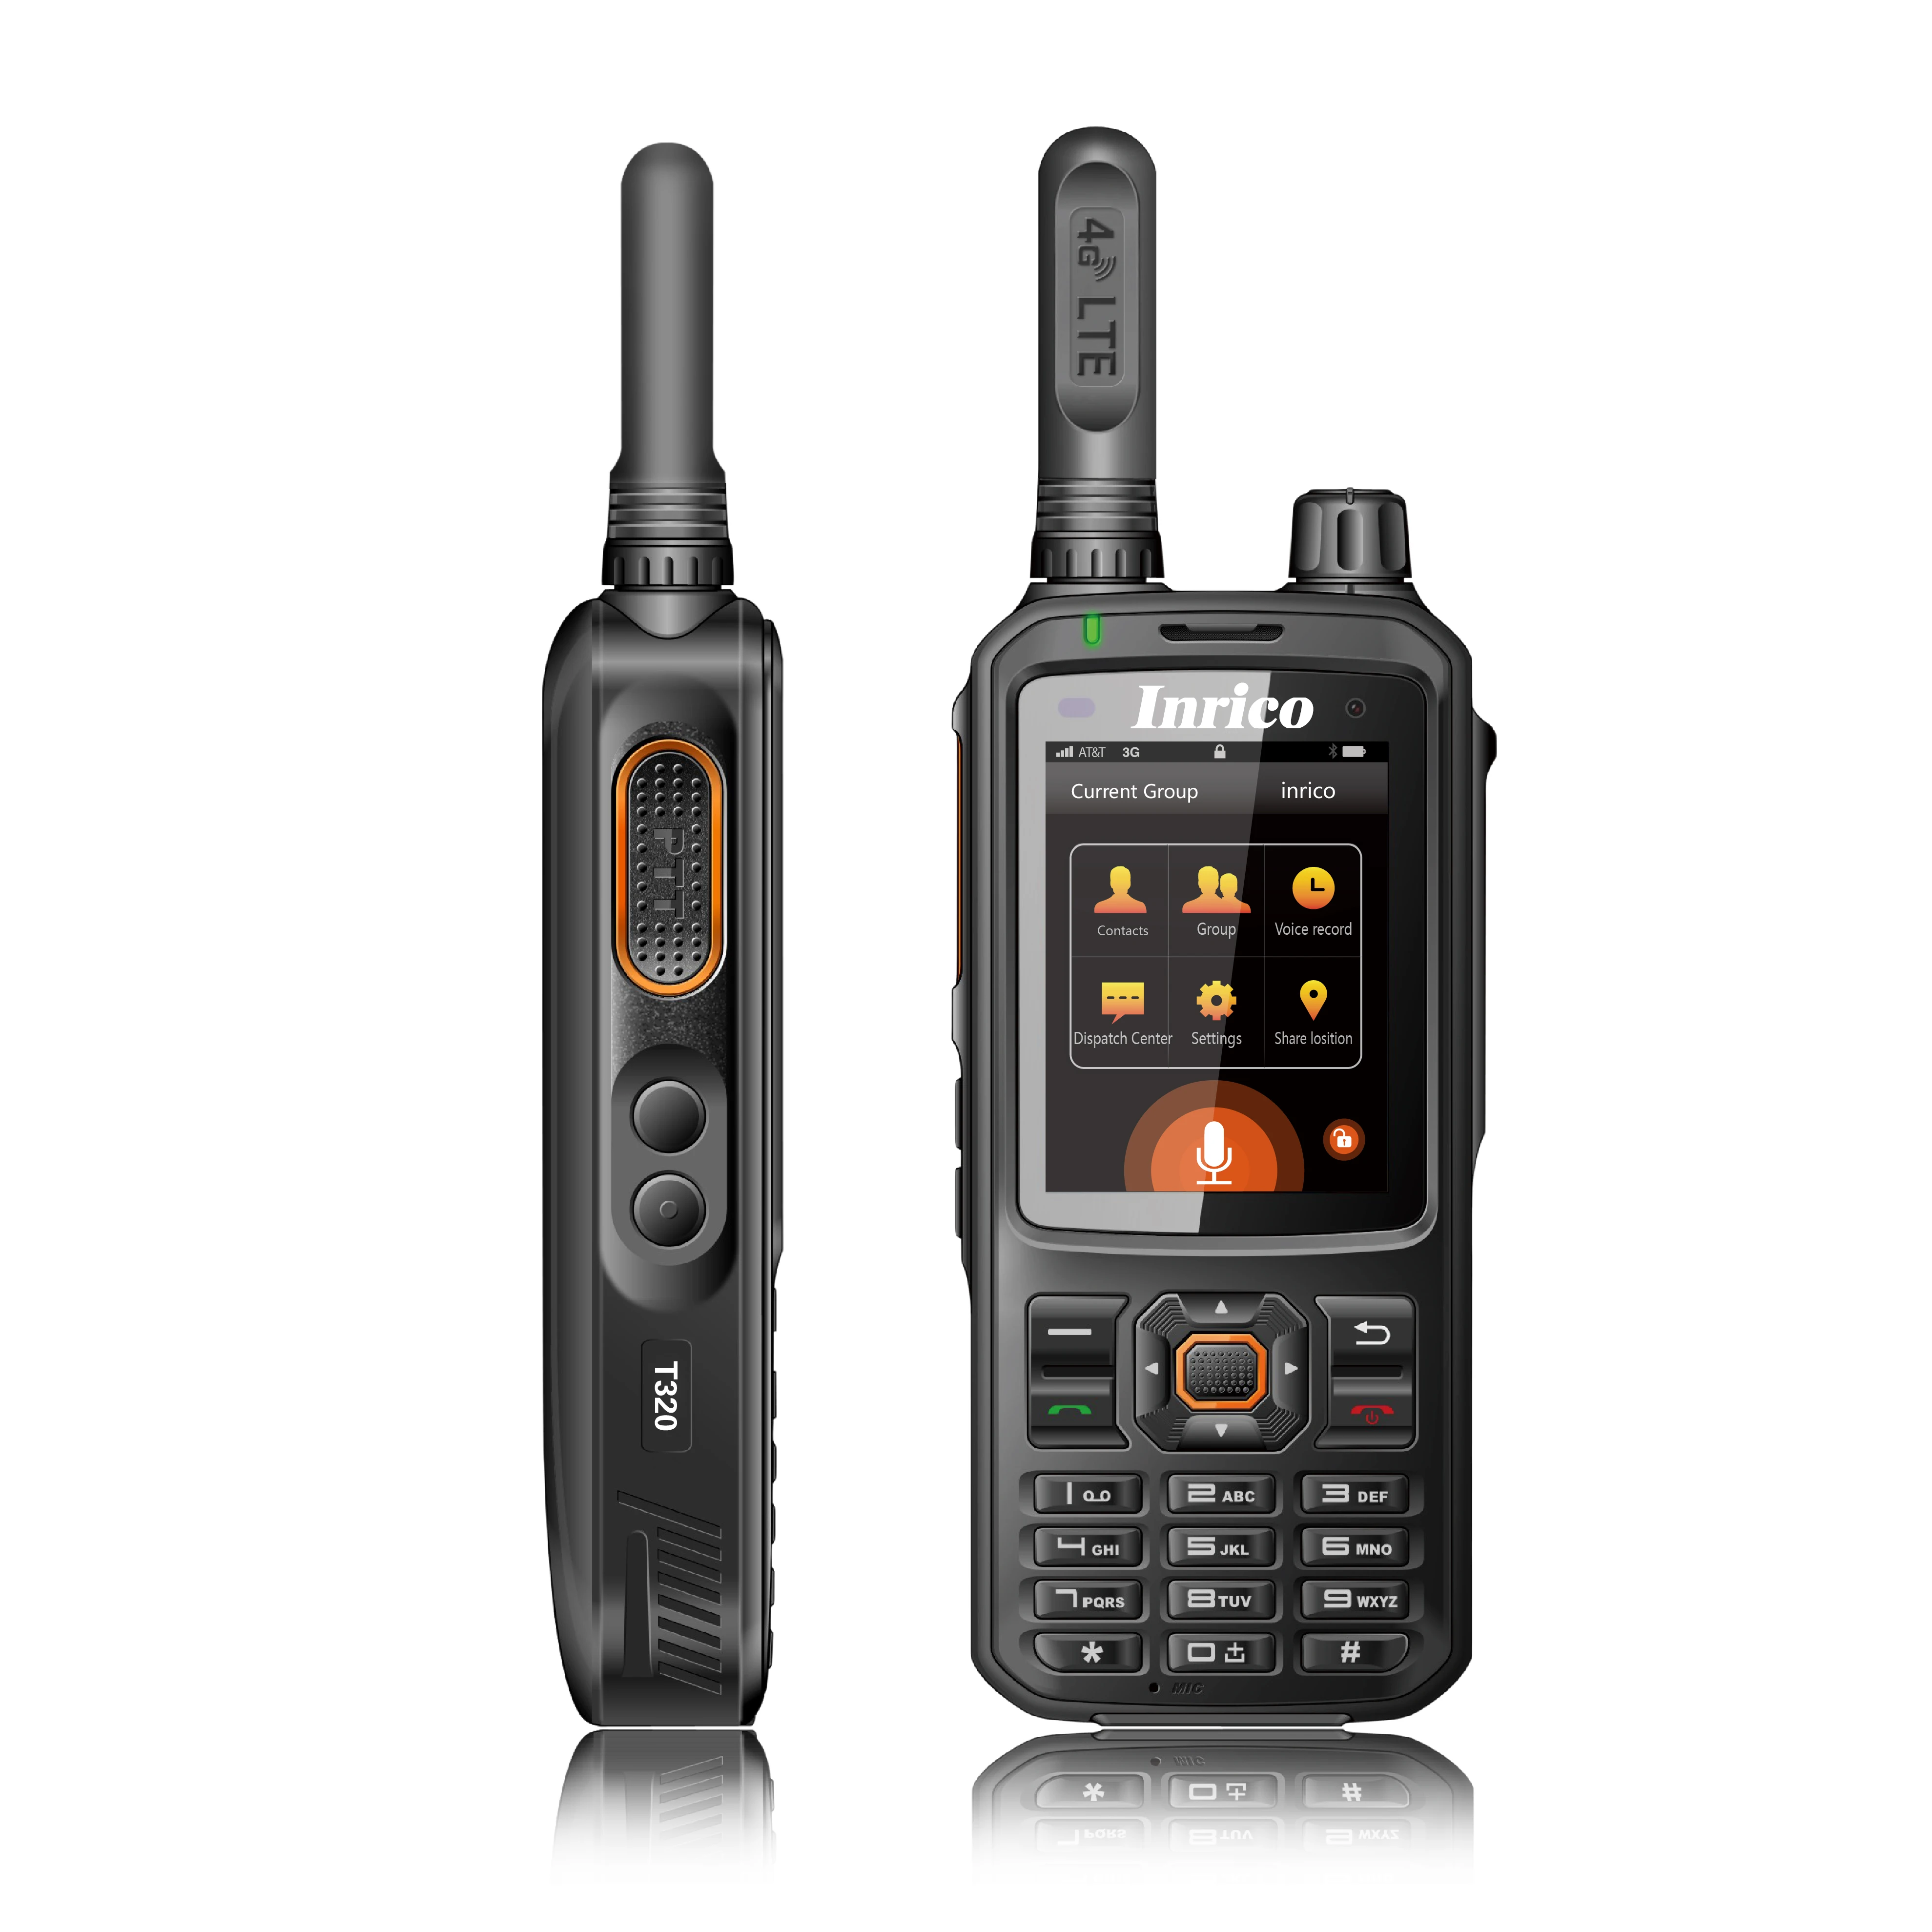 4G LTE network radio T320 with zello software